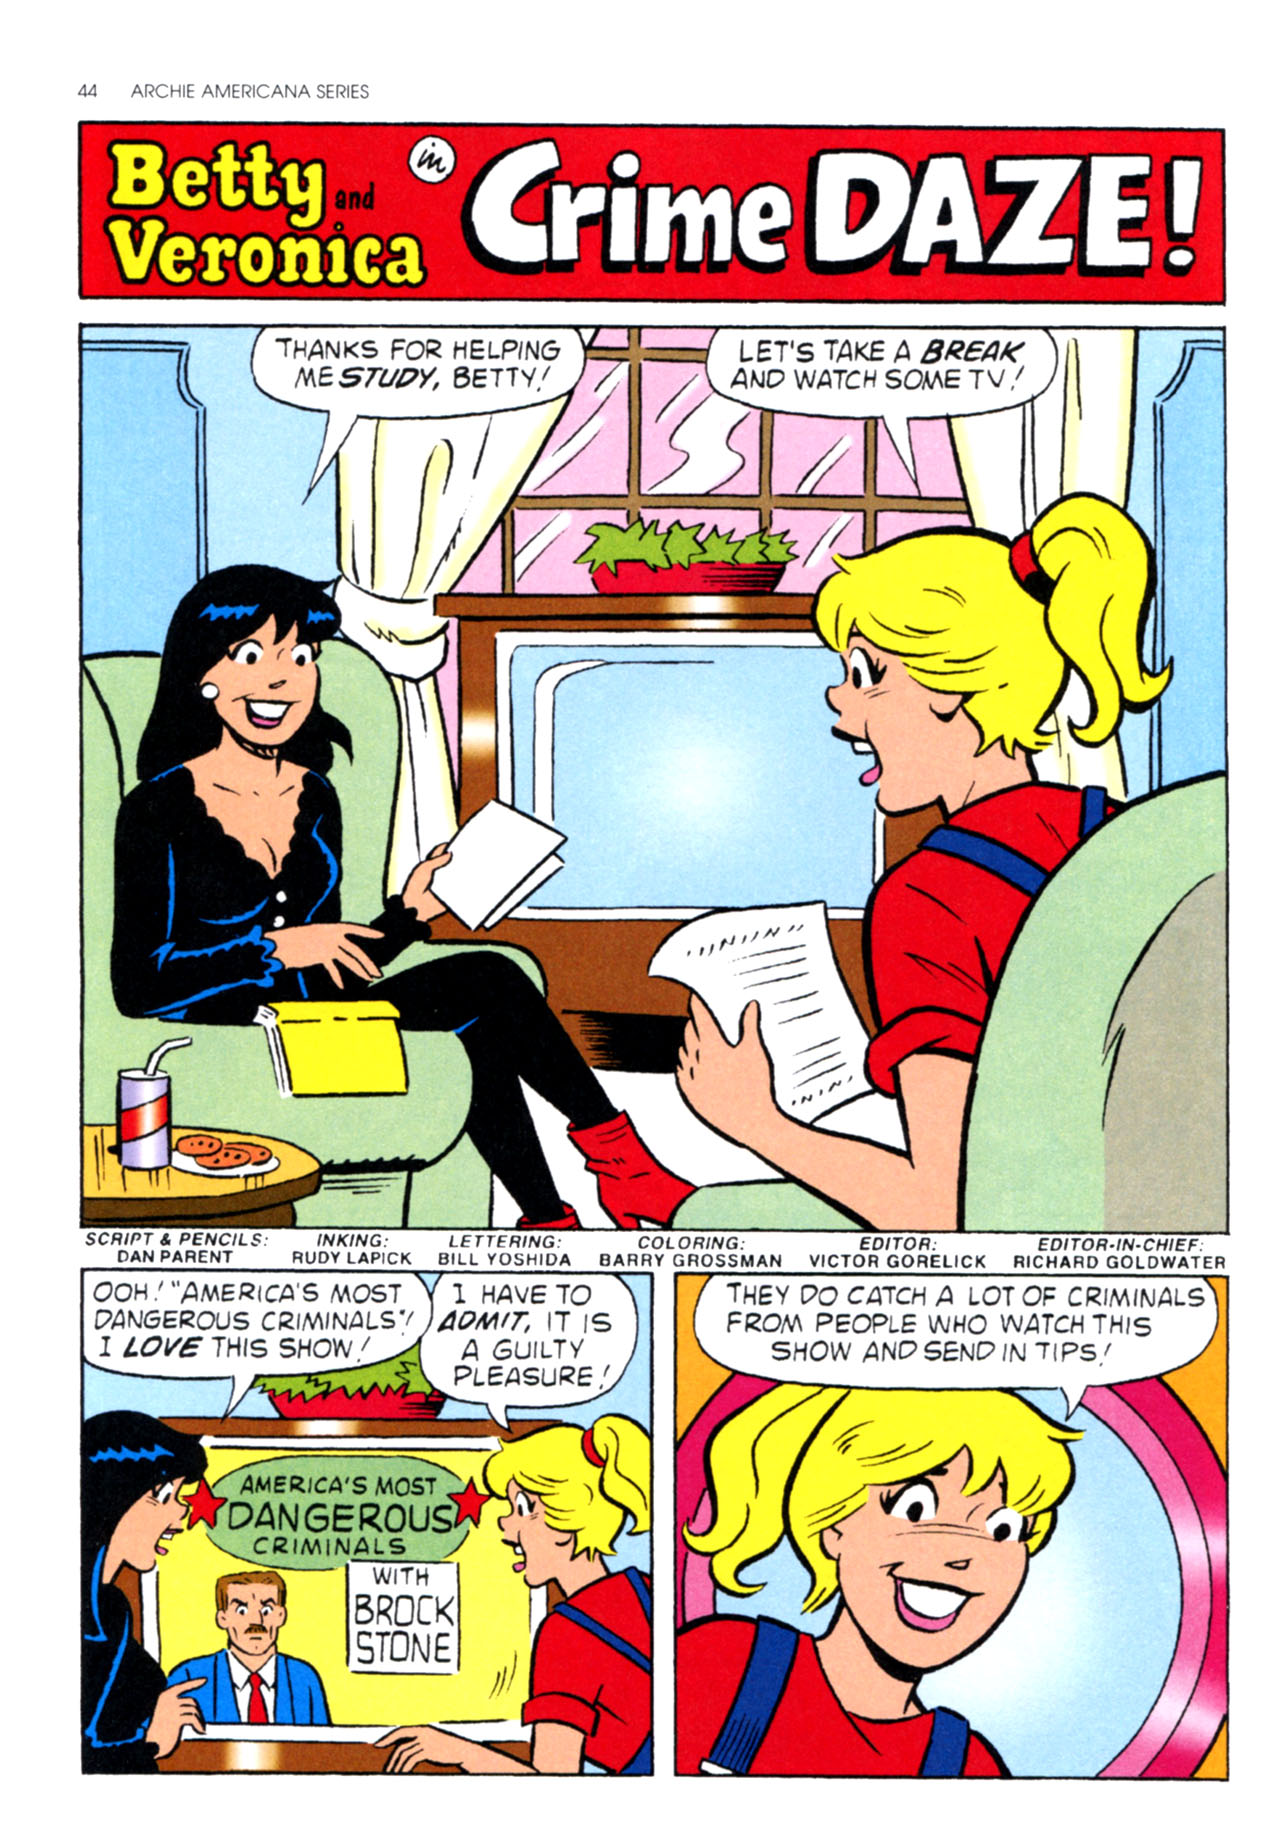 Read online Archie Americana Series comic -  Issue # TPB 12 - 46